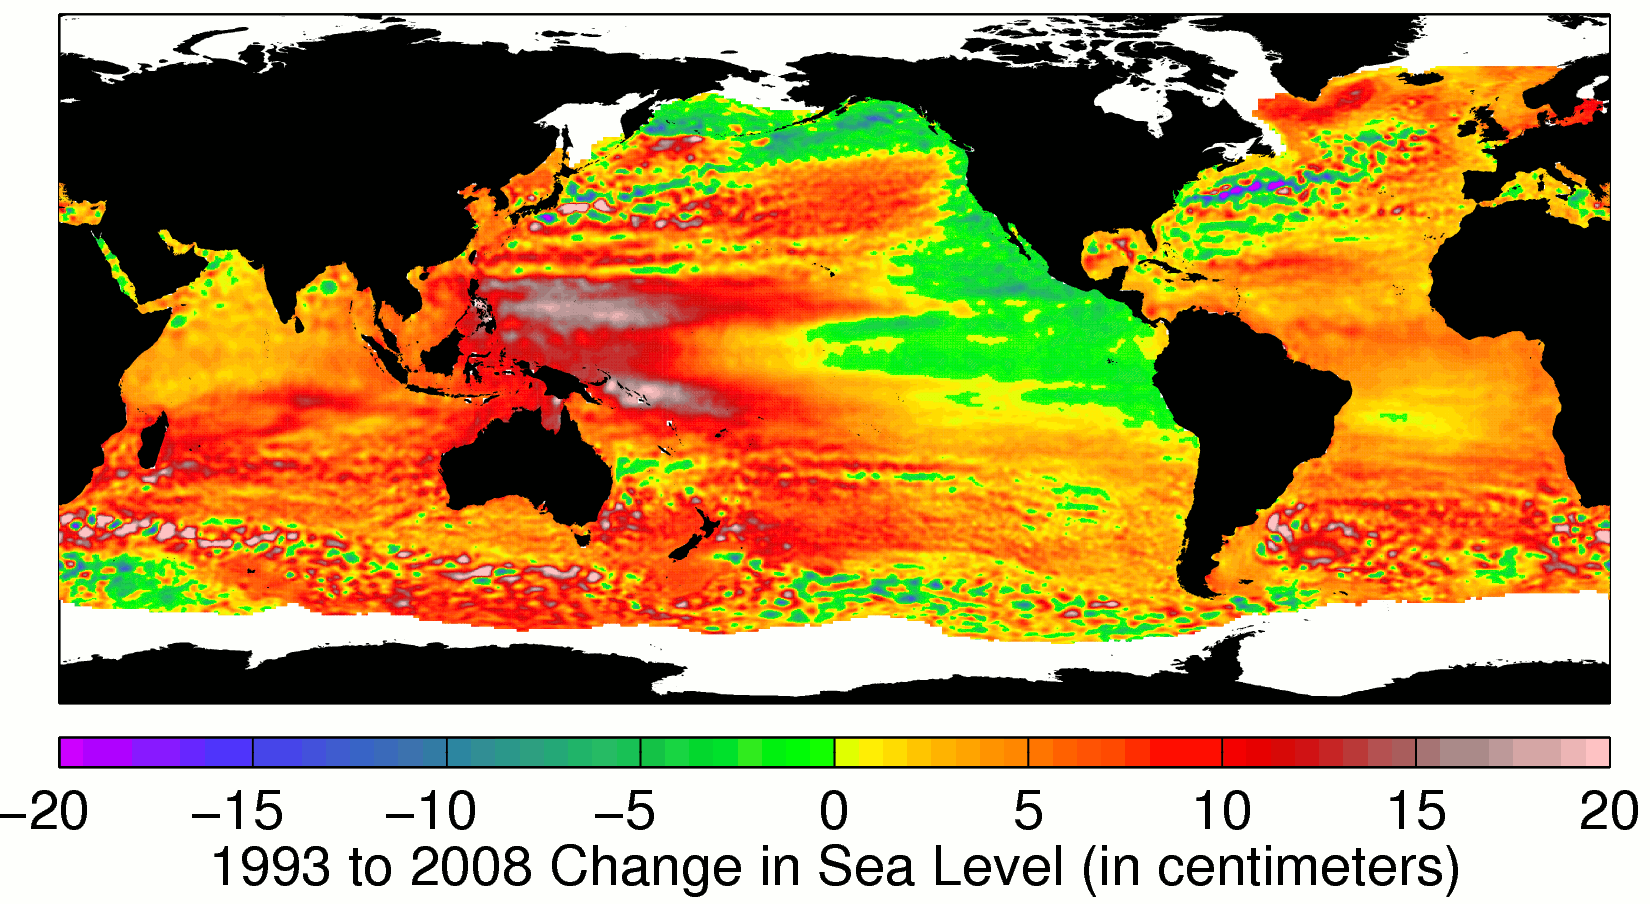 The change in the world’s sea level between 1993 and 2008. Black areas are land; colored are the oceans. Yellow and red regions show rising sea level, while green and blue regions show falling sea level. White regions are missing data during parts of the year. Nearly everywhere, sea level is rising, and the global average is clearly rising fast. But the patterns of sea level change (the regional variations) are complicated. Credit: Altimeter data products include data from TOPEX/Poseidon, Jason-1 and Jason-2 and other satellites. Data products come from Ssalto/Duacs, distributed by Aviso, with support from CNES.